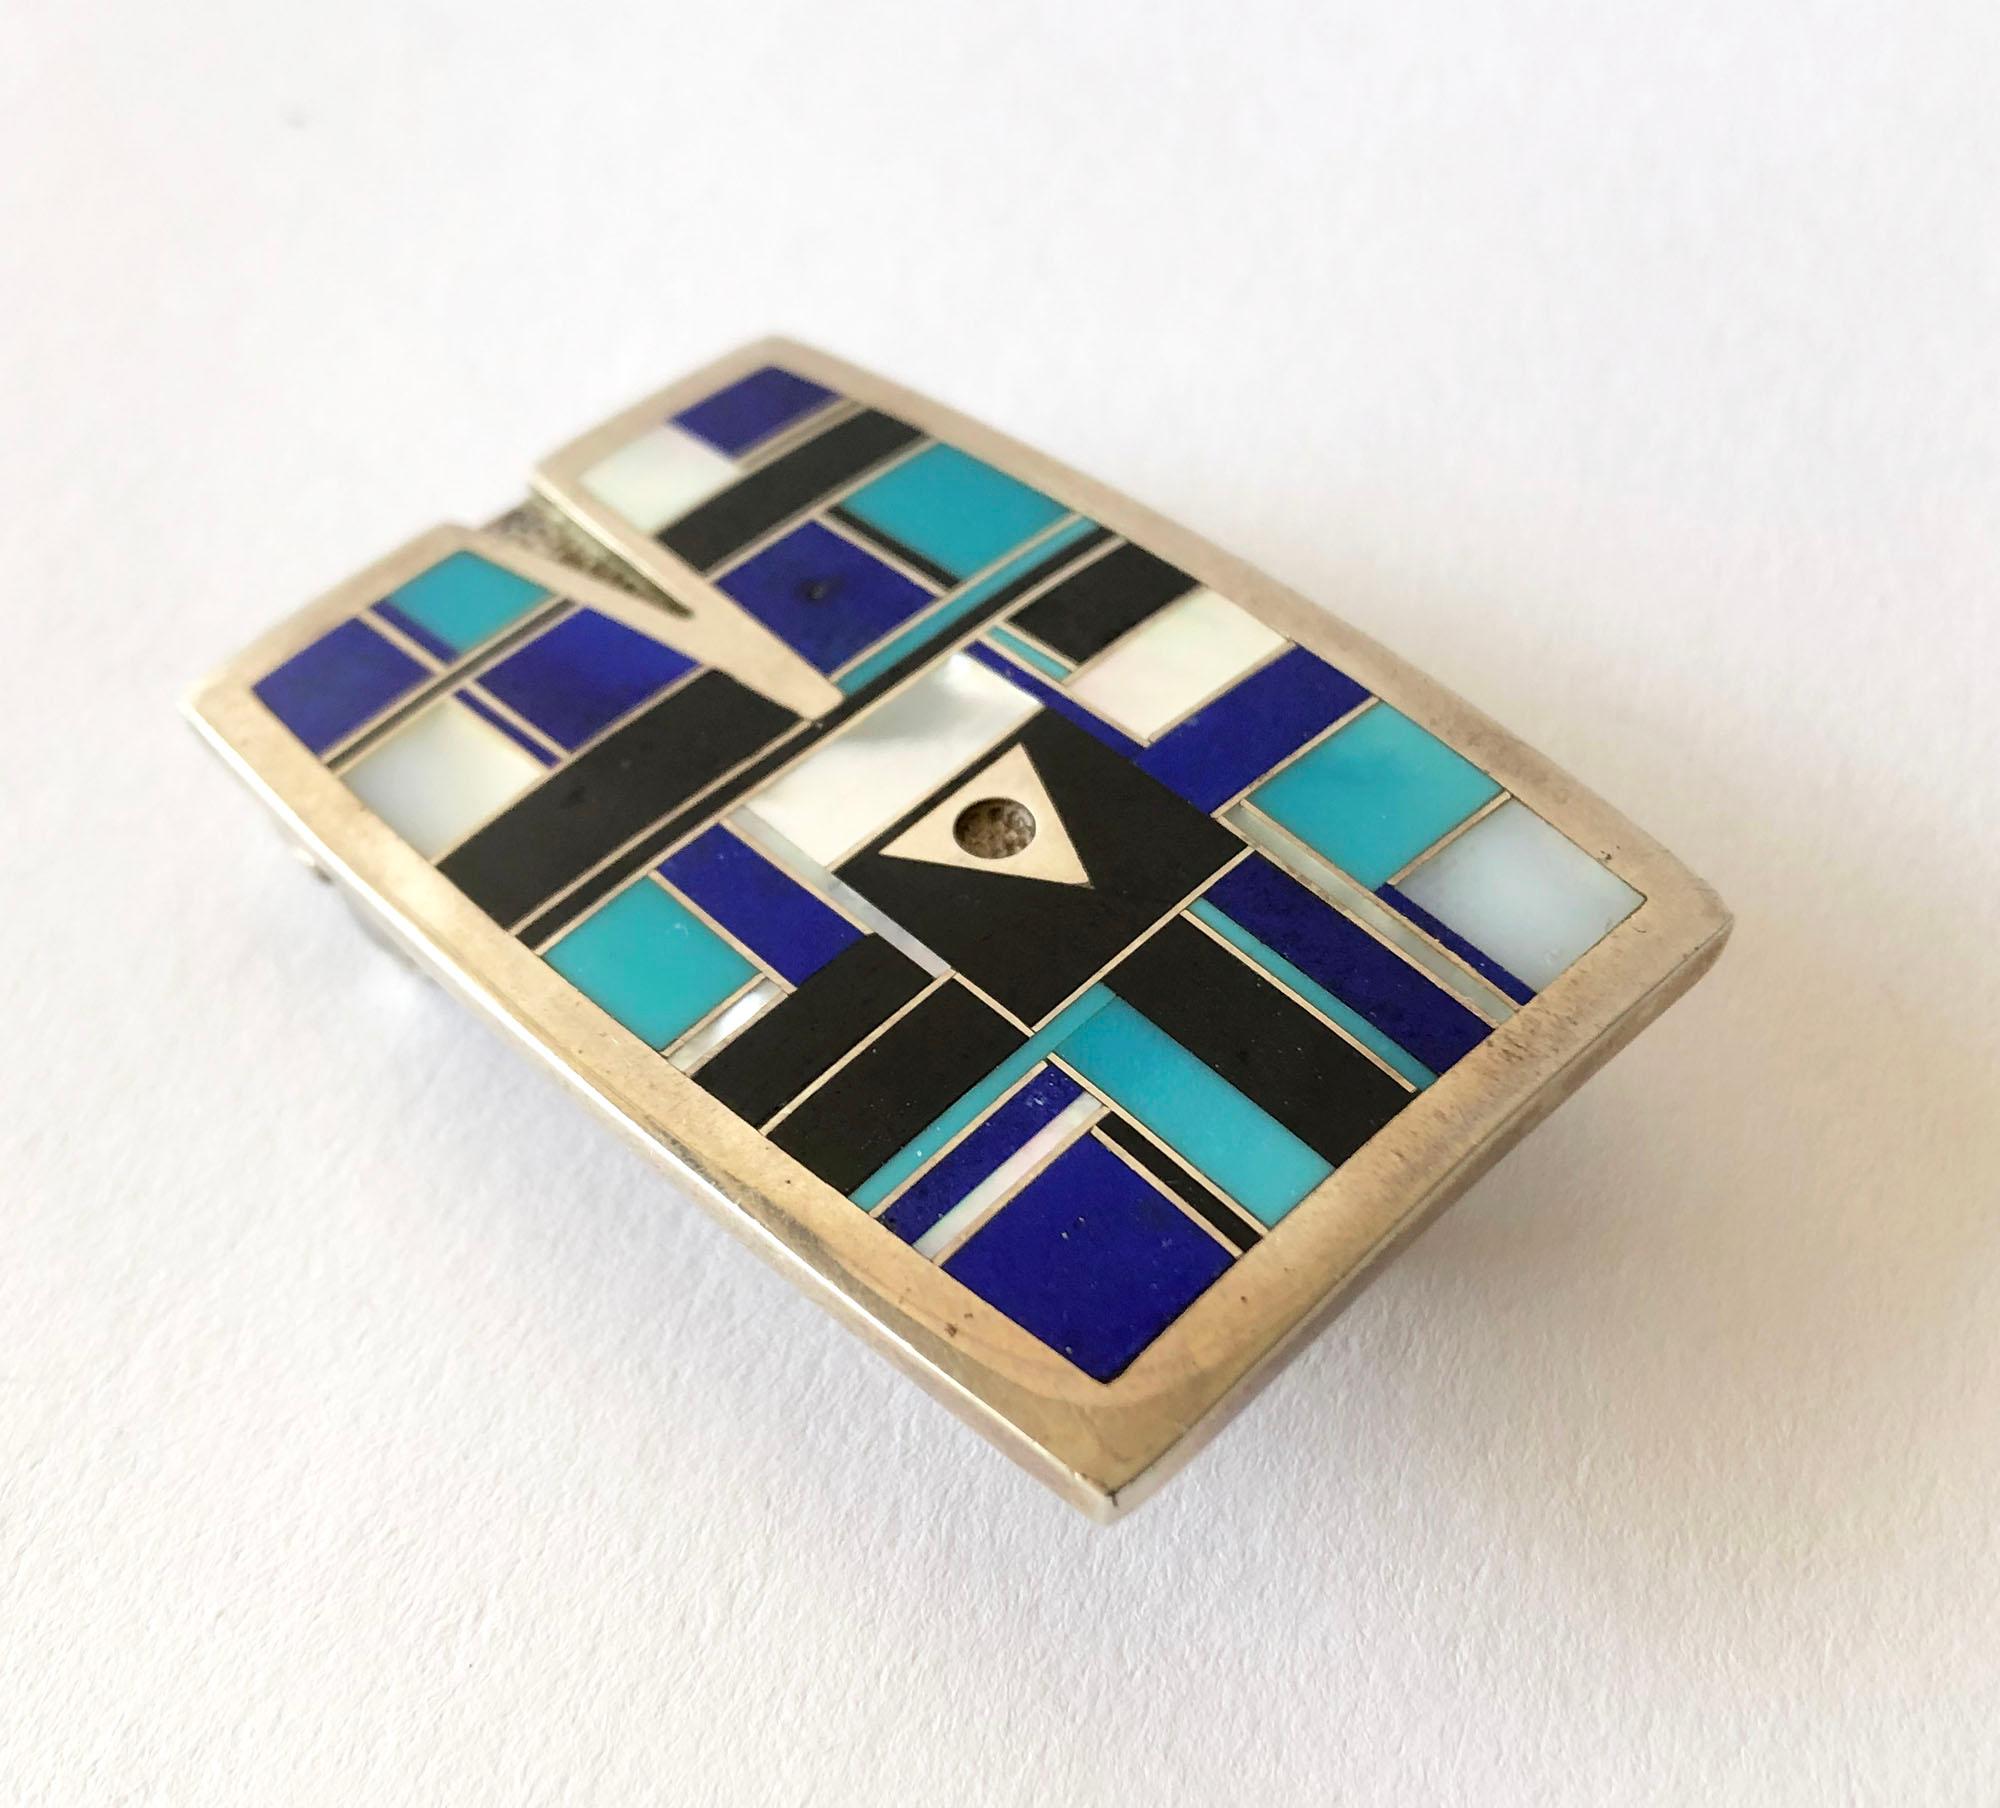 Vintage inlaid lapis lazuli, mother of pearl and sleeping beauty turquoise belt buckle with arrow design within, created by Navajo jeweler Ray Tracey.  Buckle measures 2.25